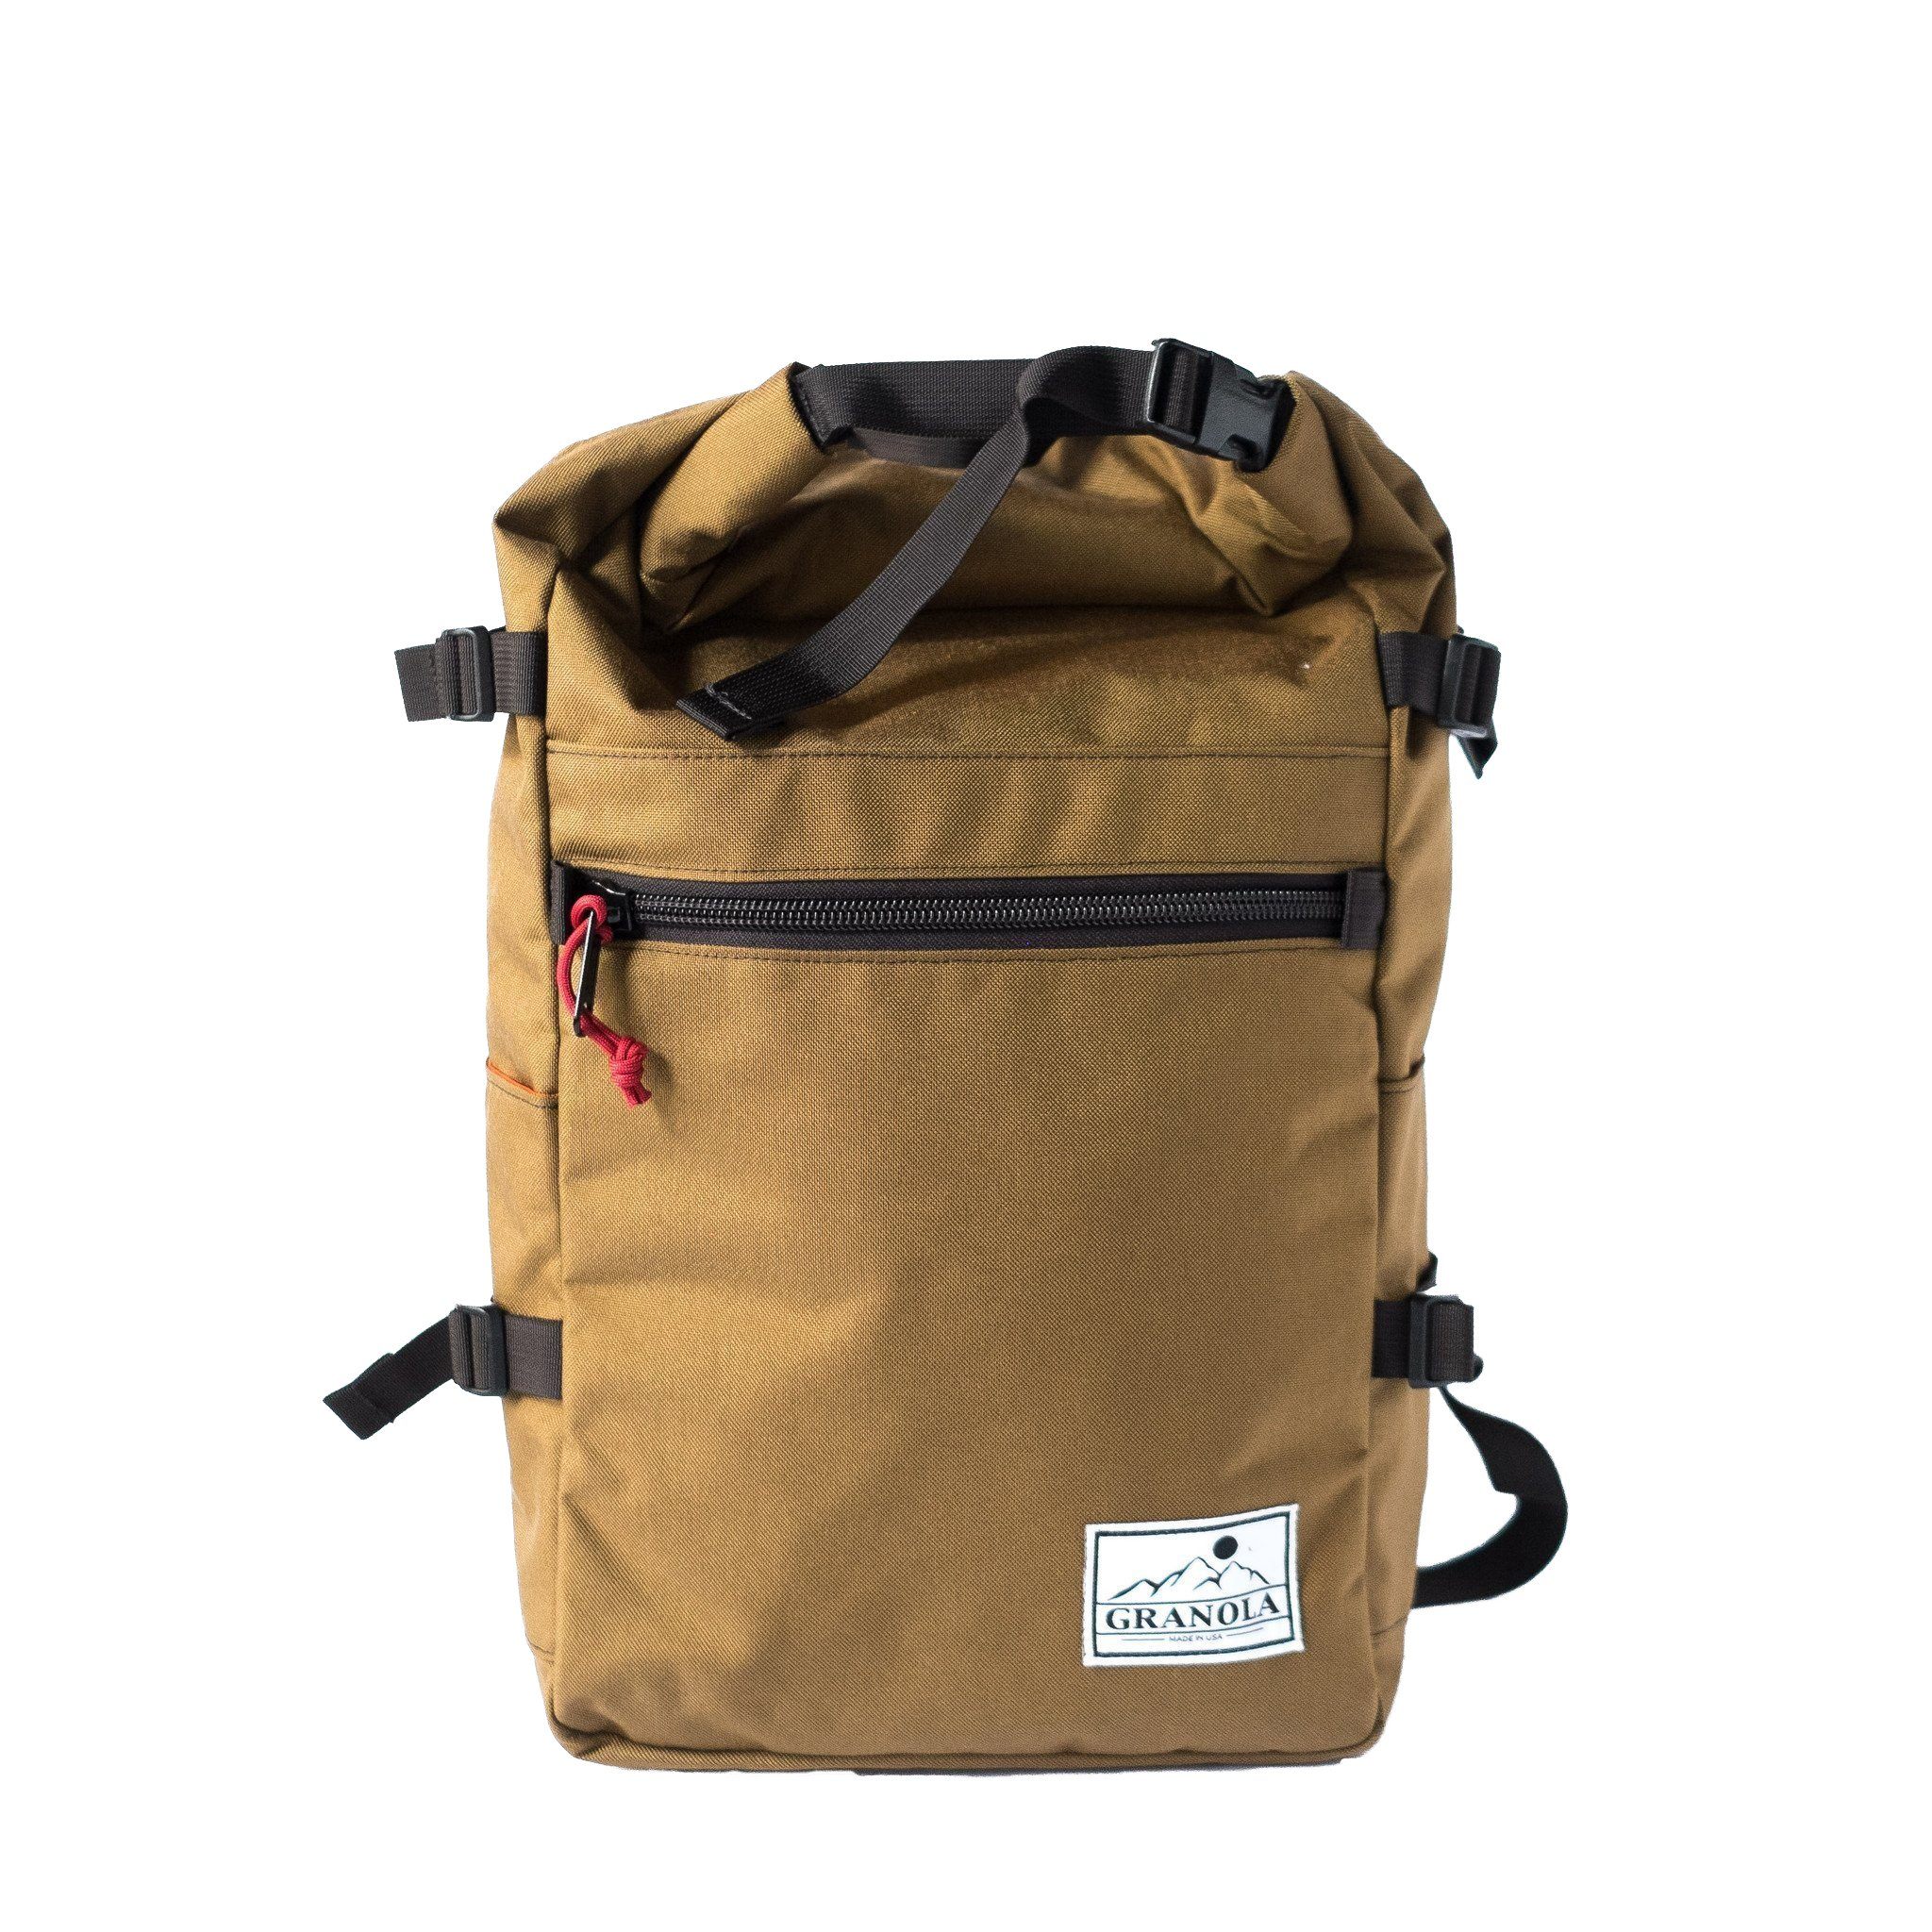 Roll Top Pack - granolaproducts.com